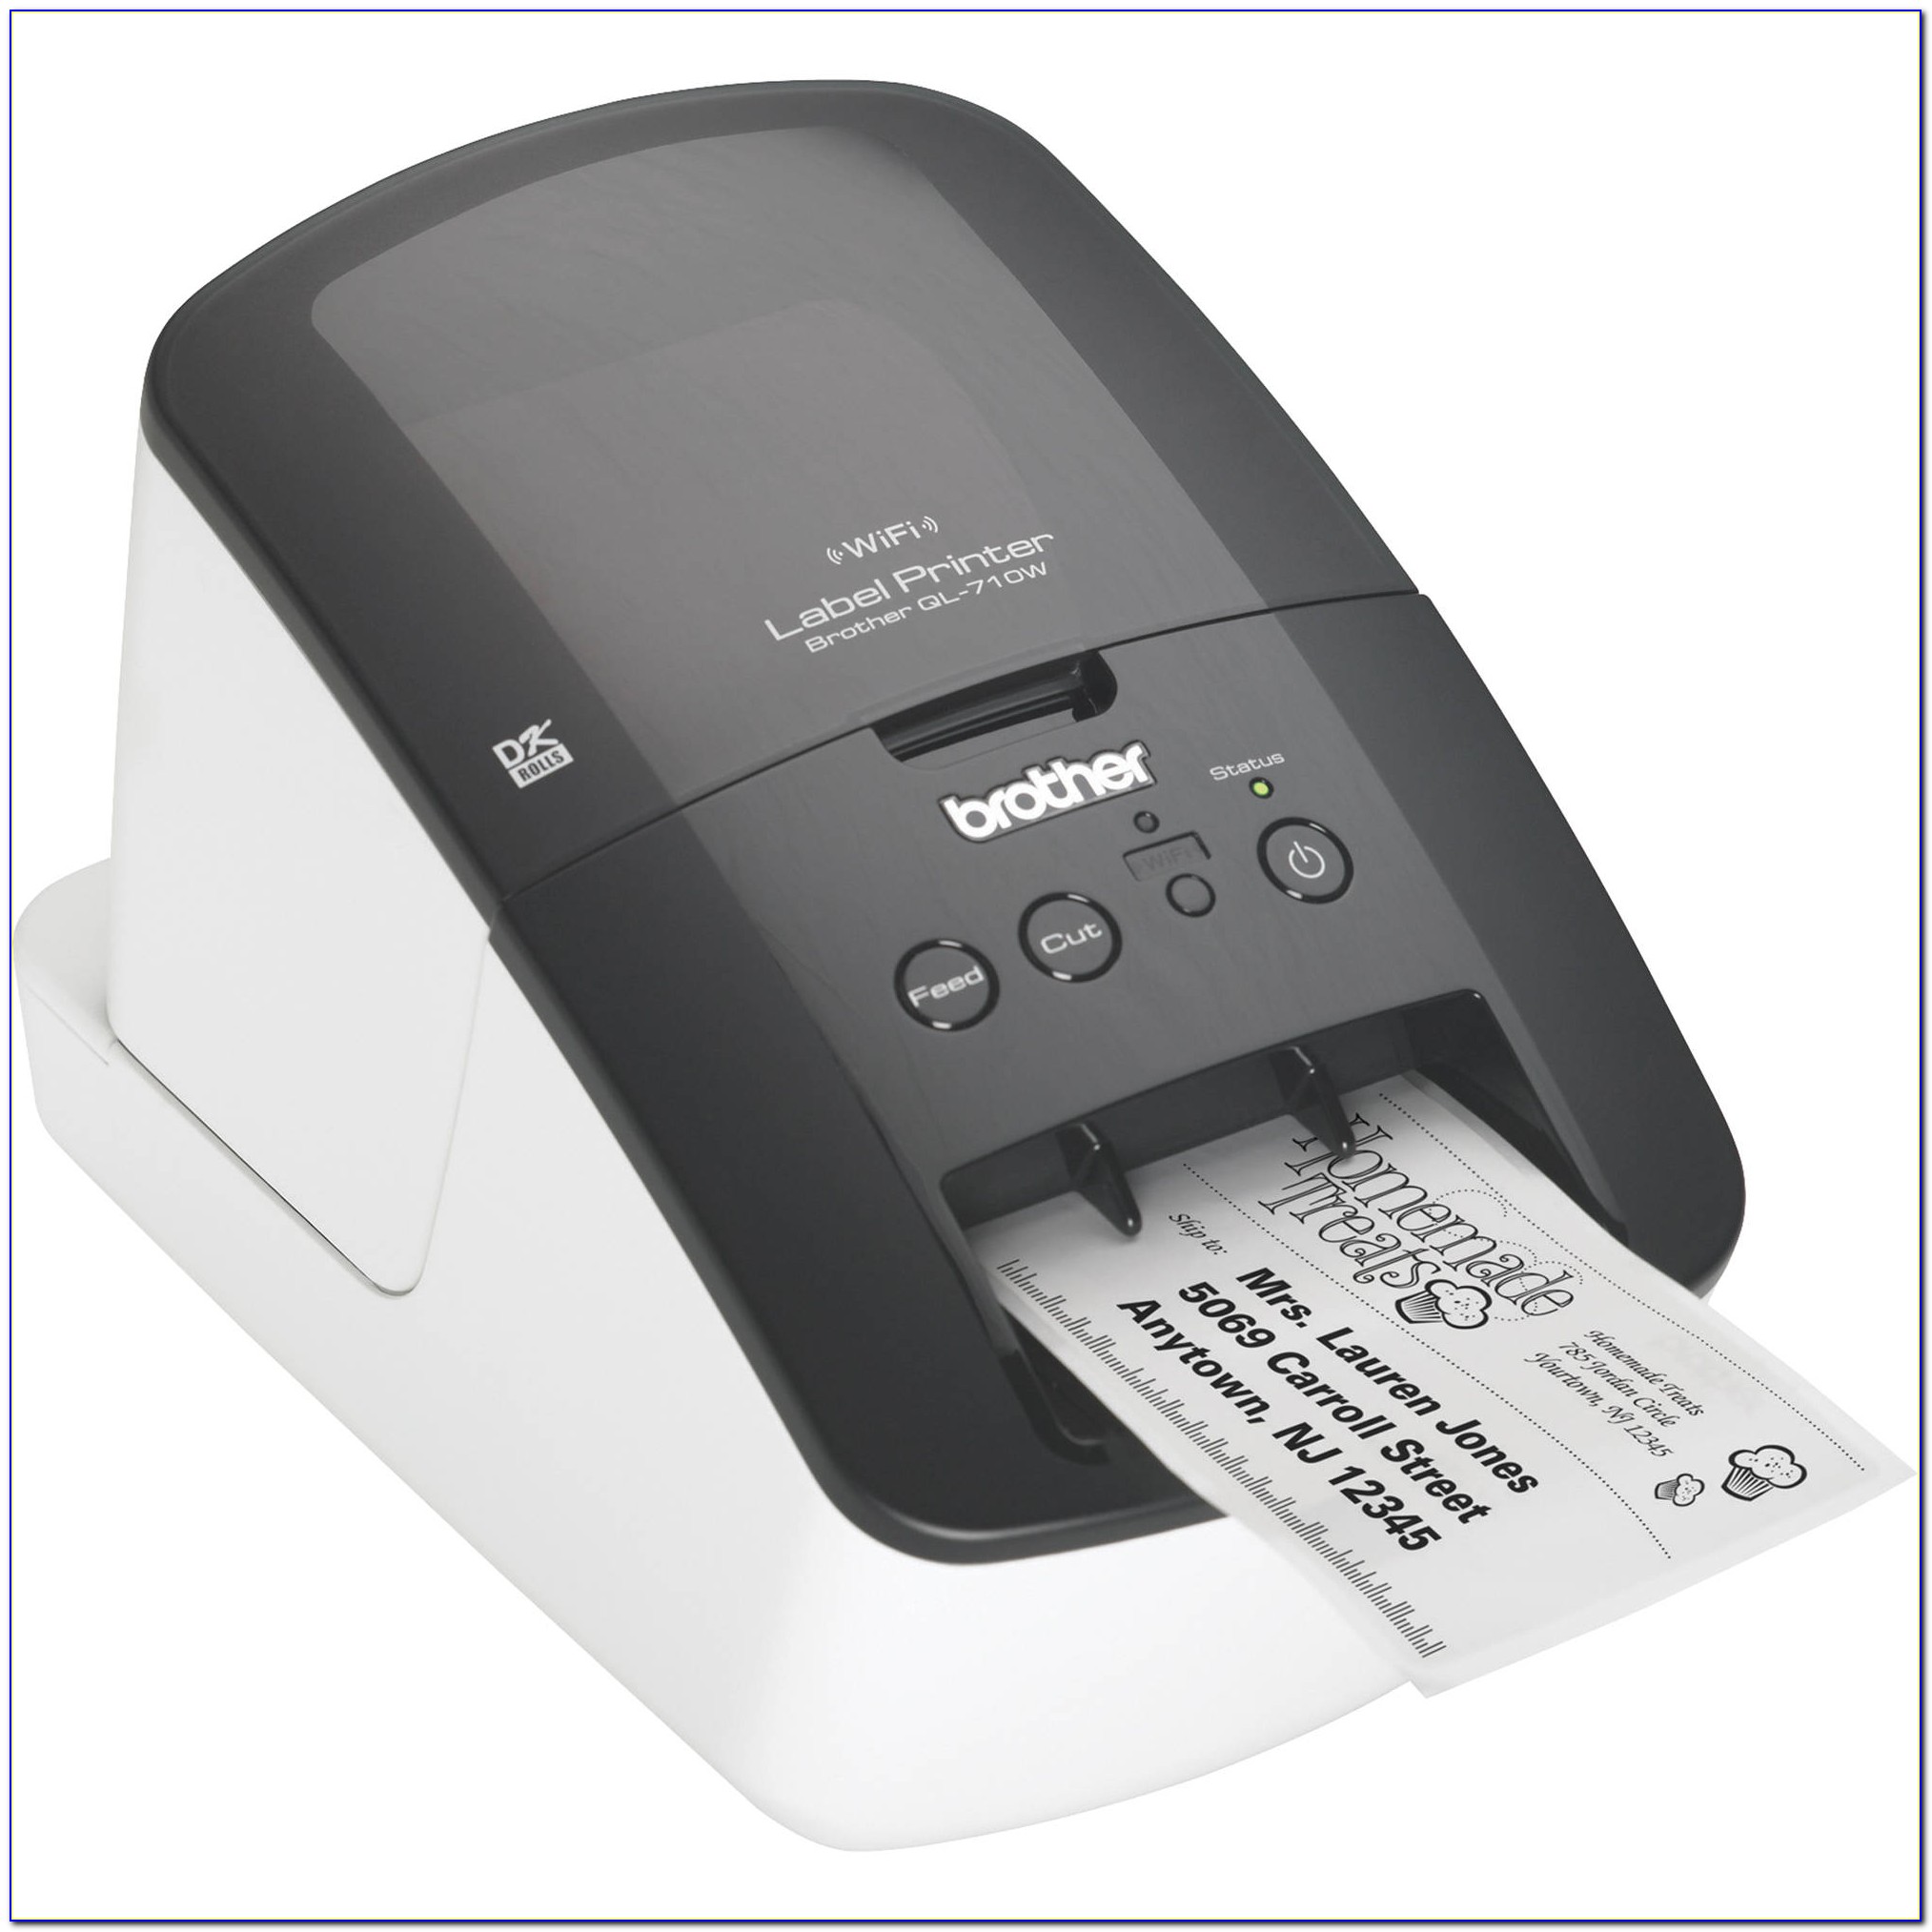 Brother Label Printer Template